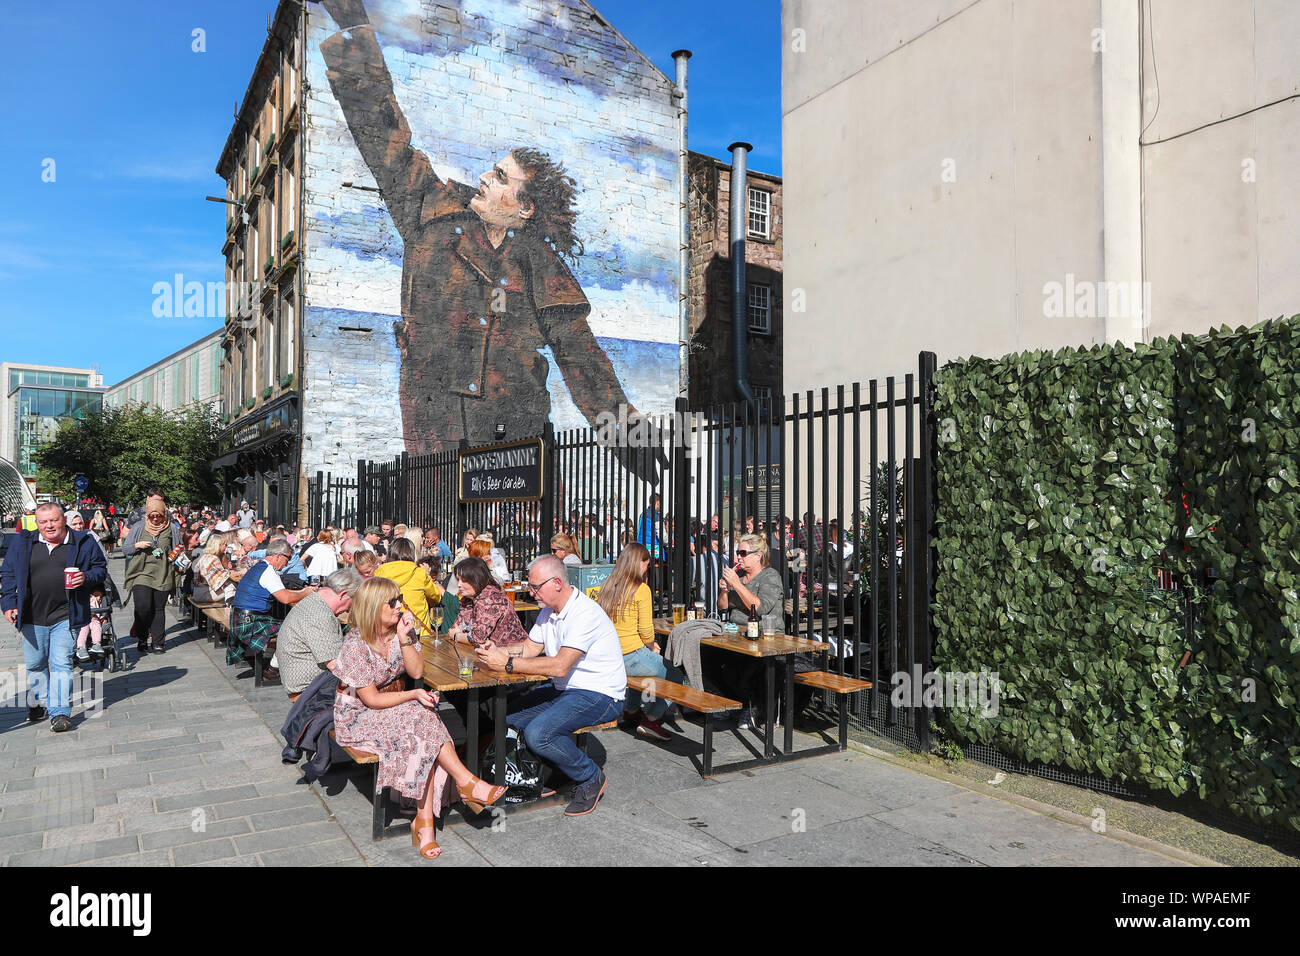 Tourists sitting on the outdoor seating at the Hootenanny pub in the area named Billy' Beer garden after the wall mural of Billy Connolly, the famous Stock Photo